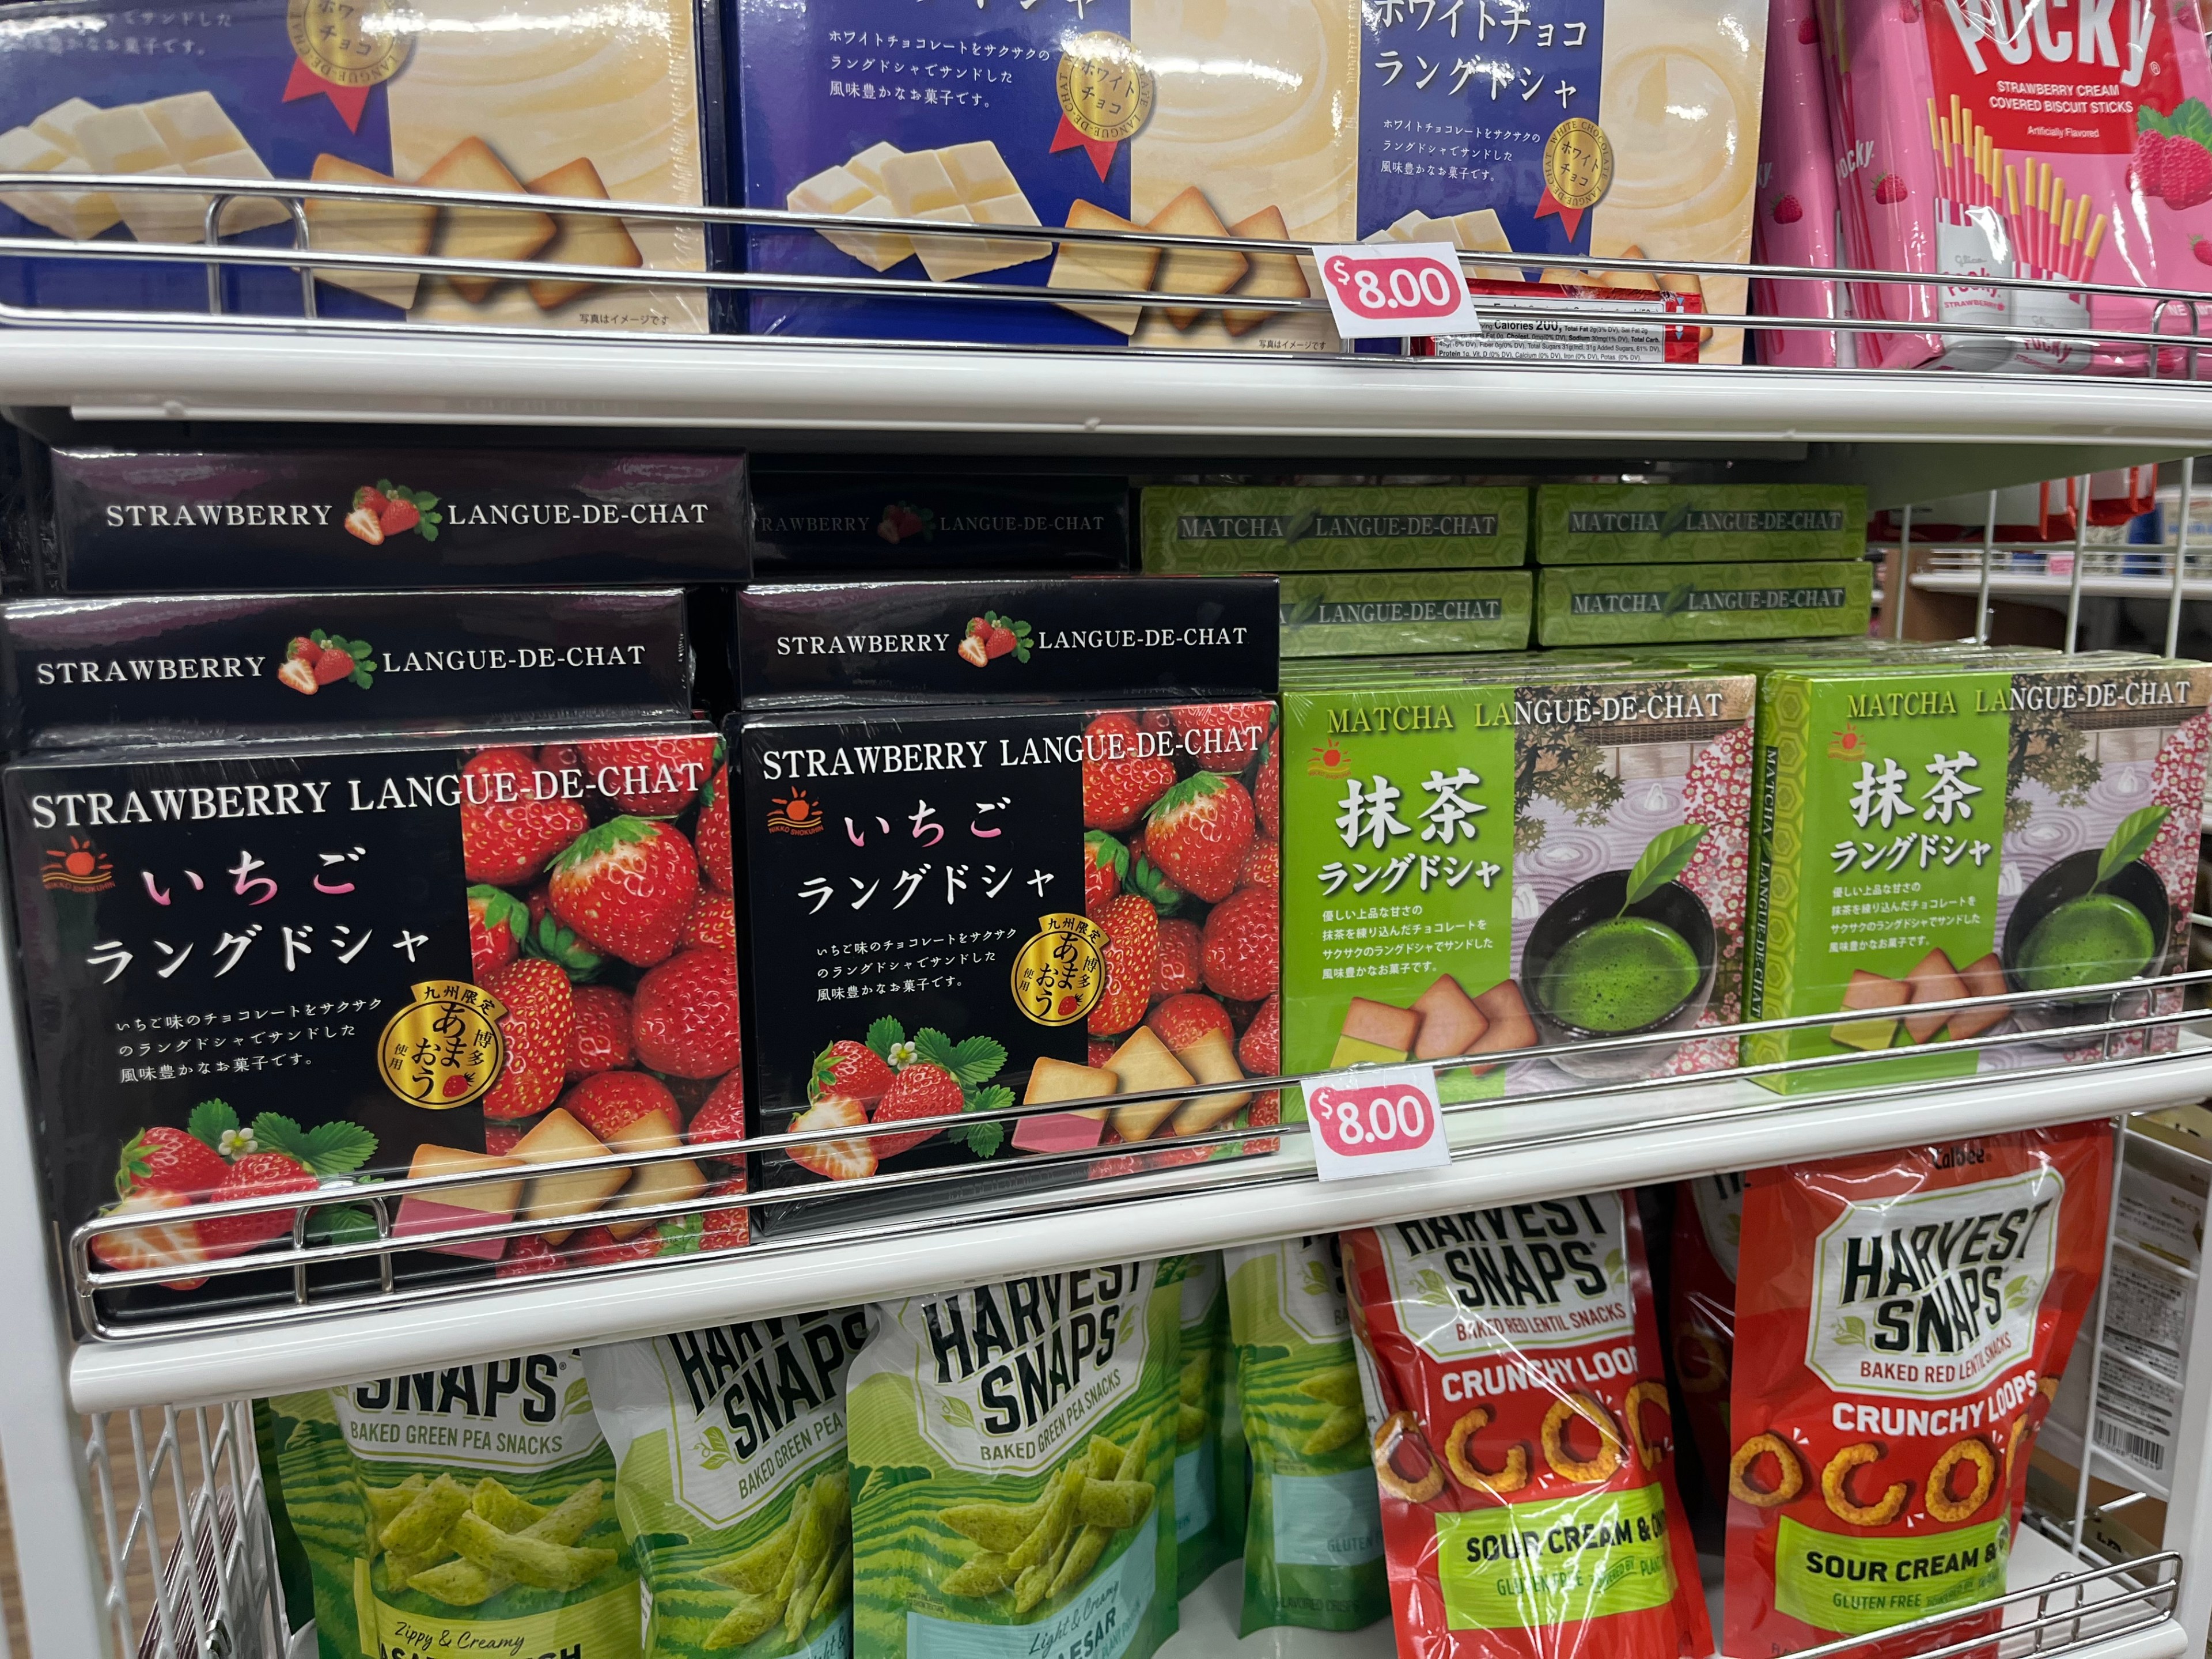 The strawberry- and matcha-flavored snacks are listed as $8 each at Daiso.